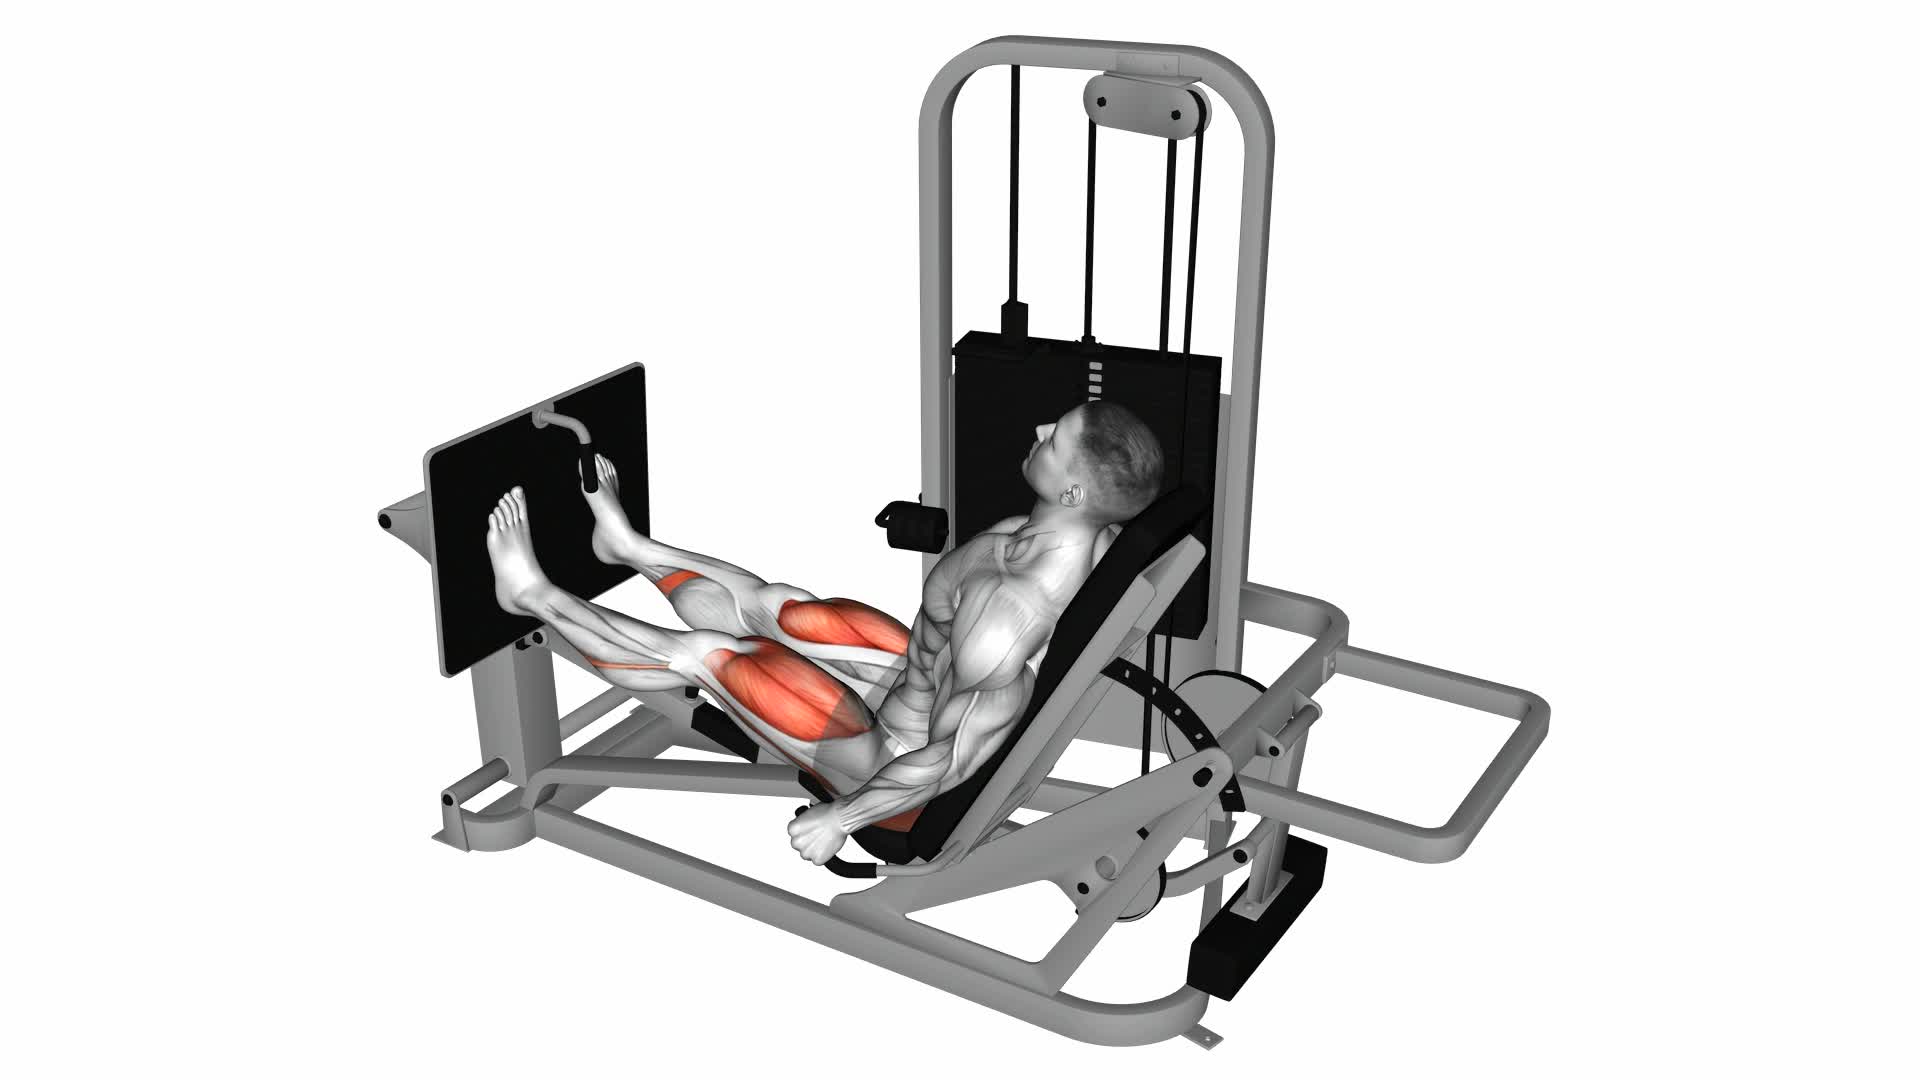 Lever Seated Leg Press - Video Exercise Guide & Tips